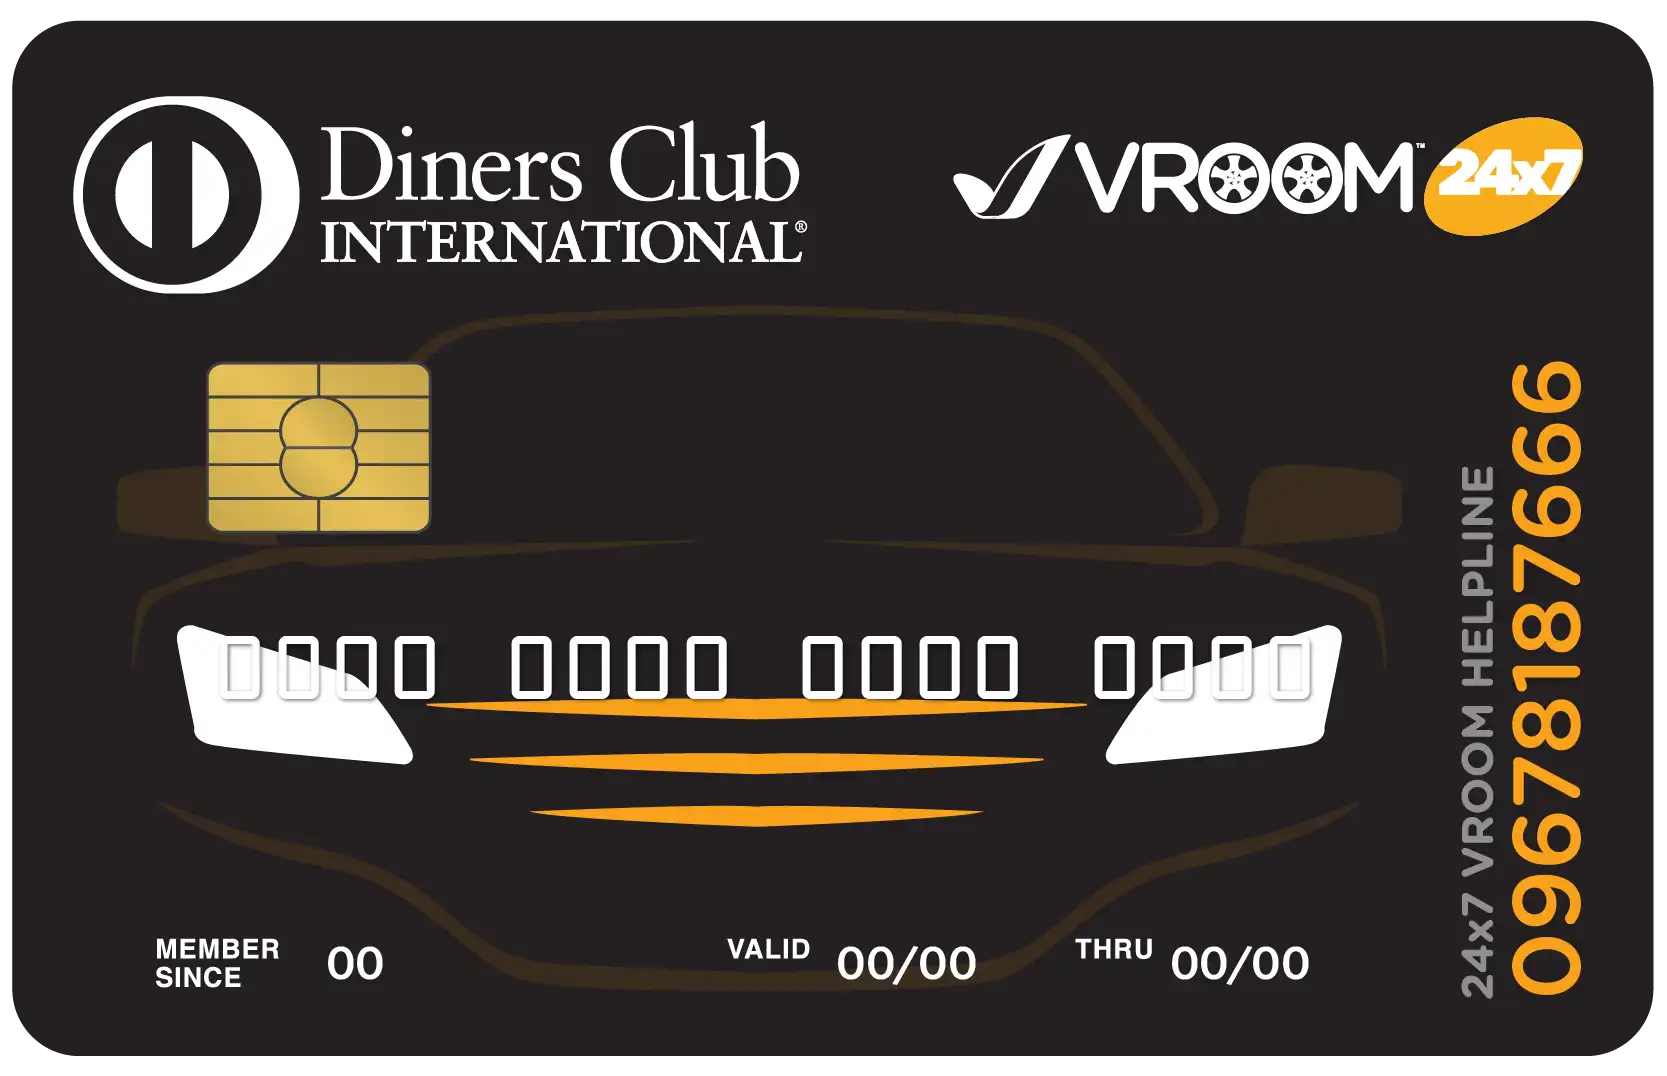 DCI Vroom Co-brand Credit Card